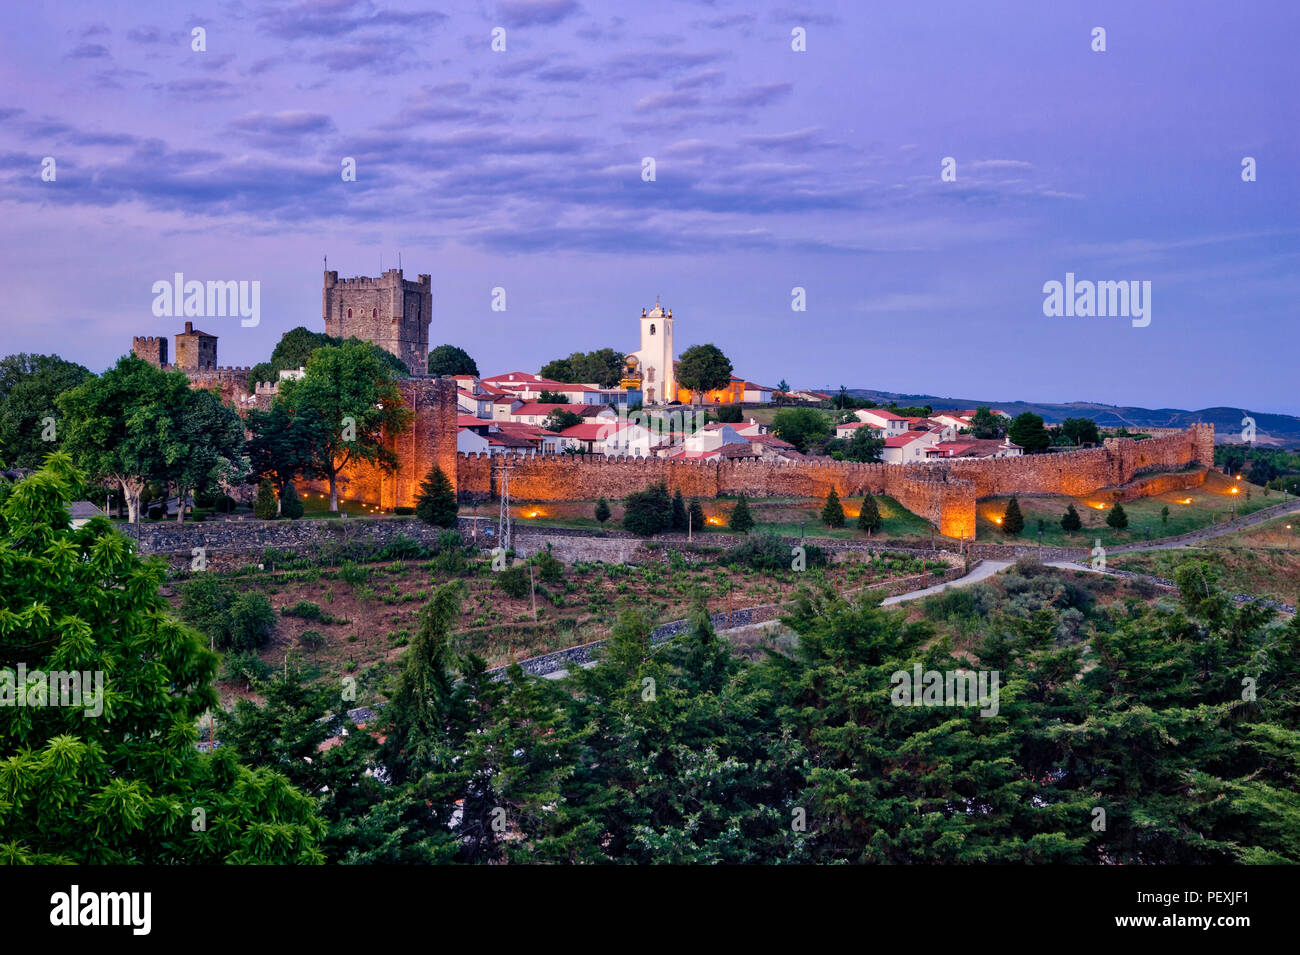 North Portugal, the Trás-os-Montes district, Braganca castle and old town, evening light Stock Photo